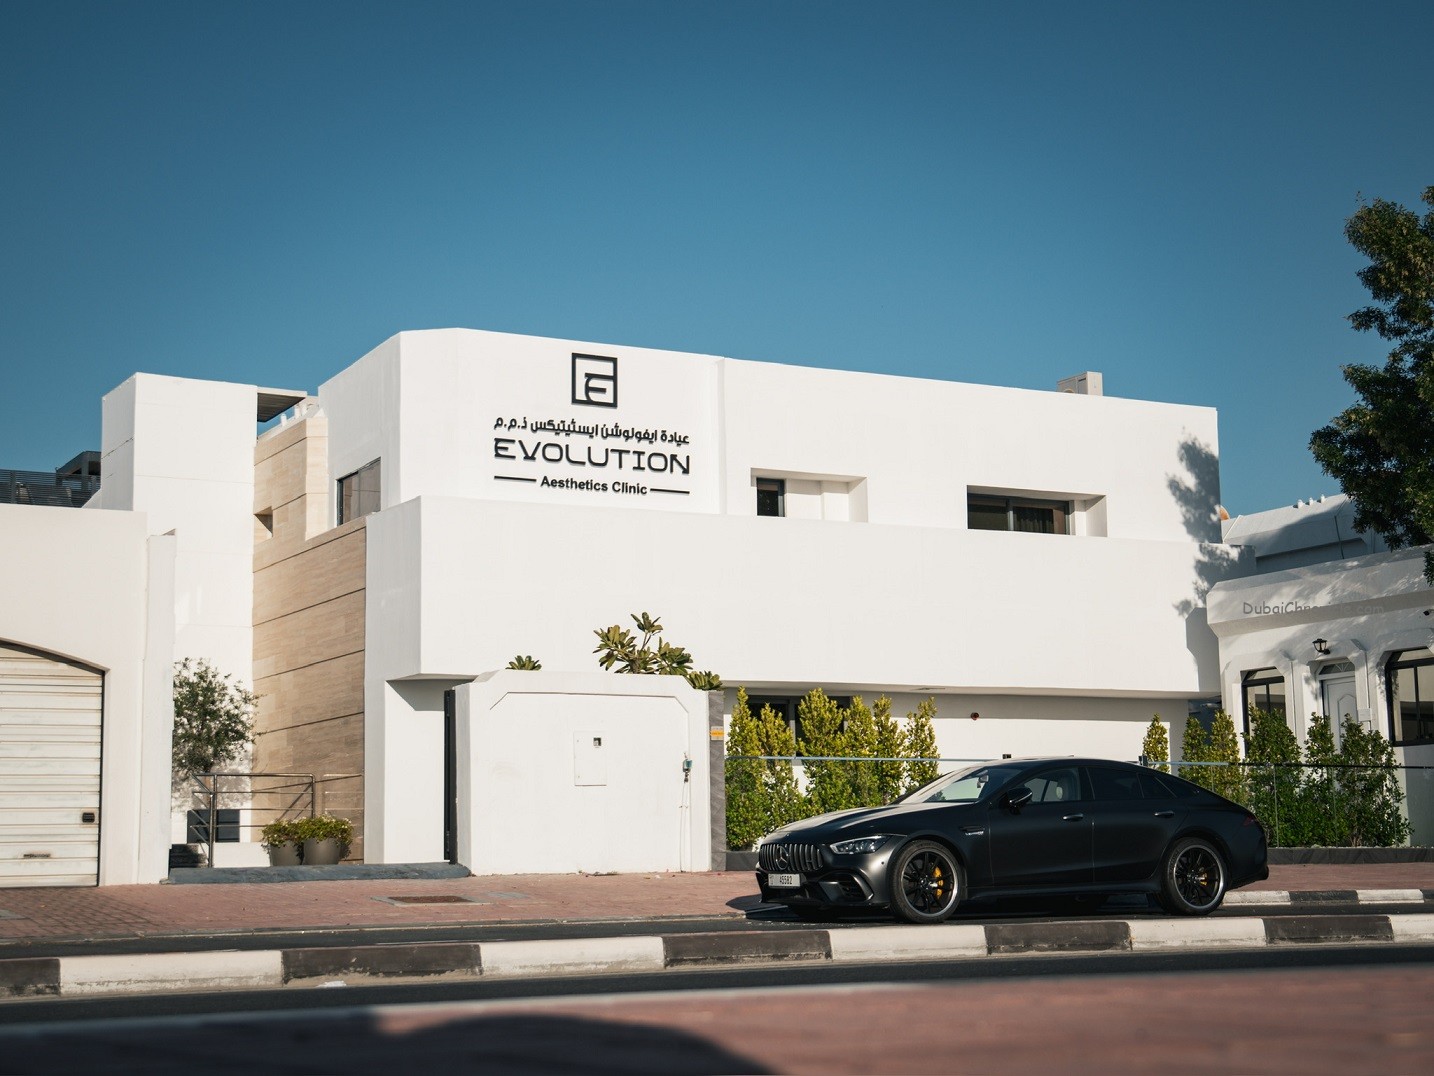 Evolution Aesthetics Clinic has proudly introduced cutting-edge technologies, setting a new standard in the beauty and wellness industry in Dubai.